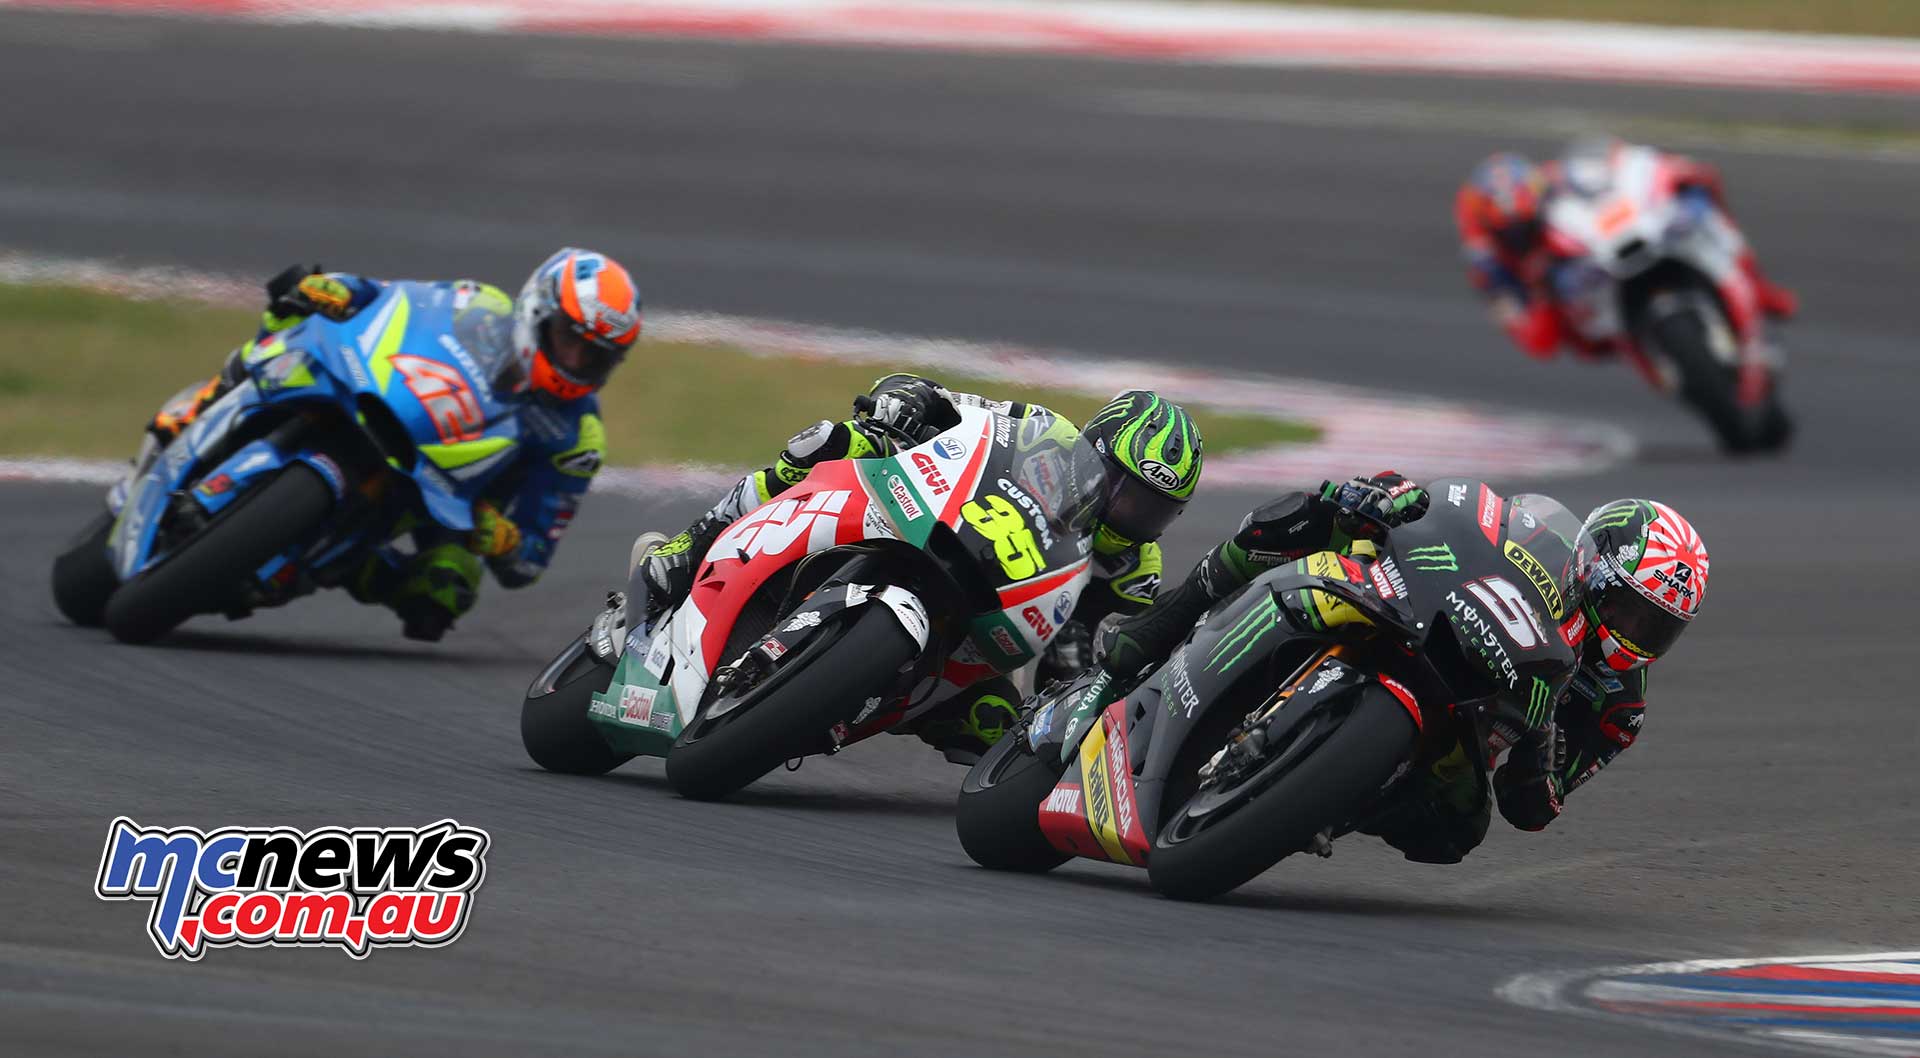 Cal Crutchlow will also be one to watch, having made a strong start to the season